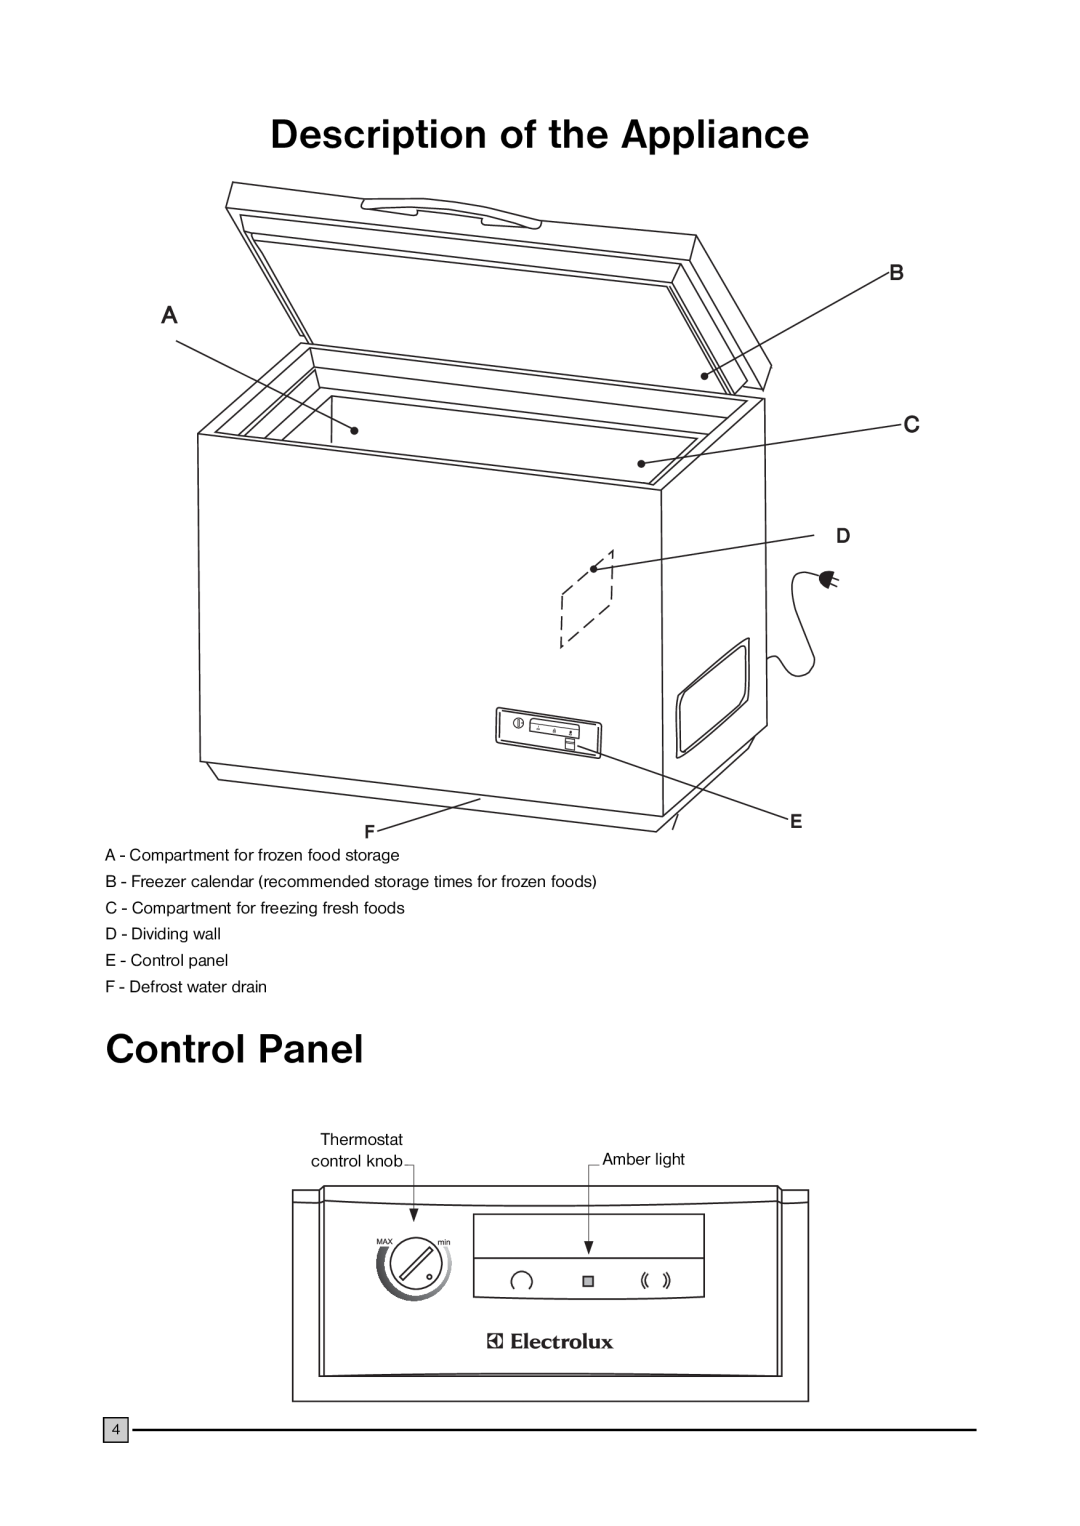 Electrolux ECN 2757 manual Description of the Appliance, Control Panel, A - Compartment for frozen food storage, Thermostat 